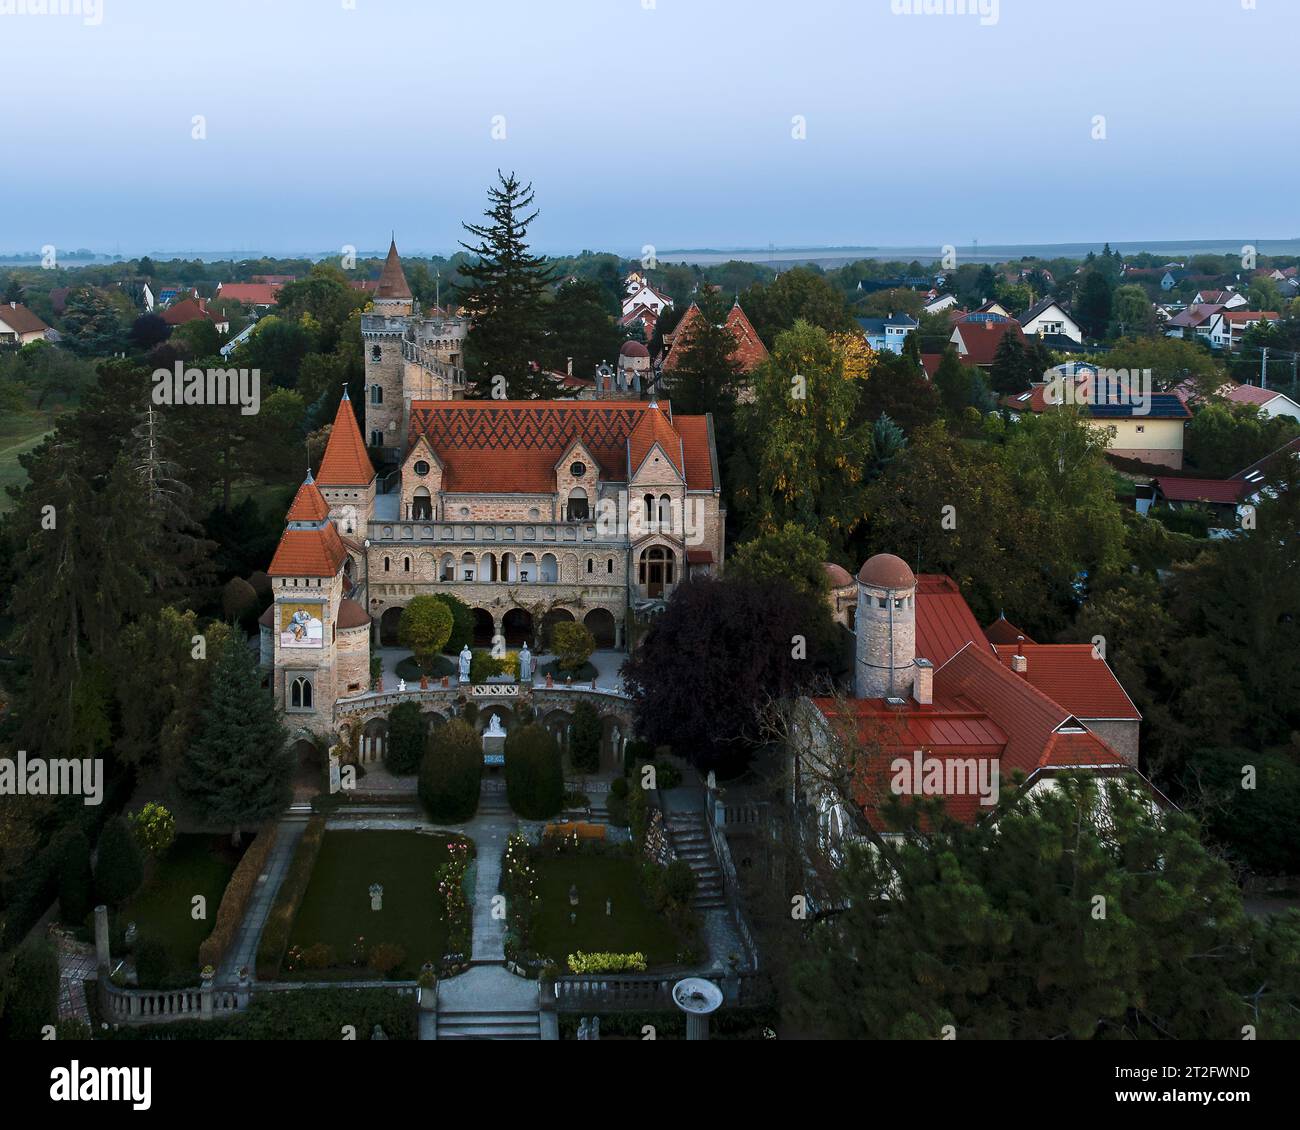 Bory castle is a cute attraction in Szekesfehervar city, Hungary. Aerial view of the amazing building at sunrise time. Stock Photo